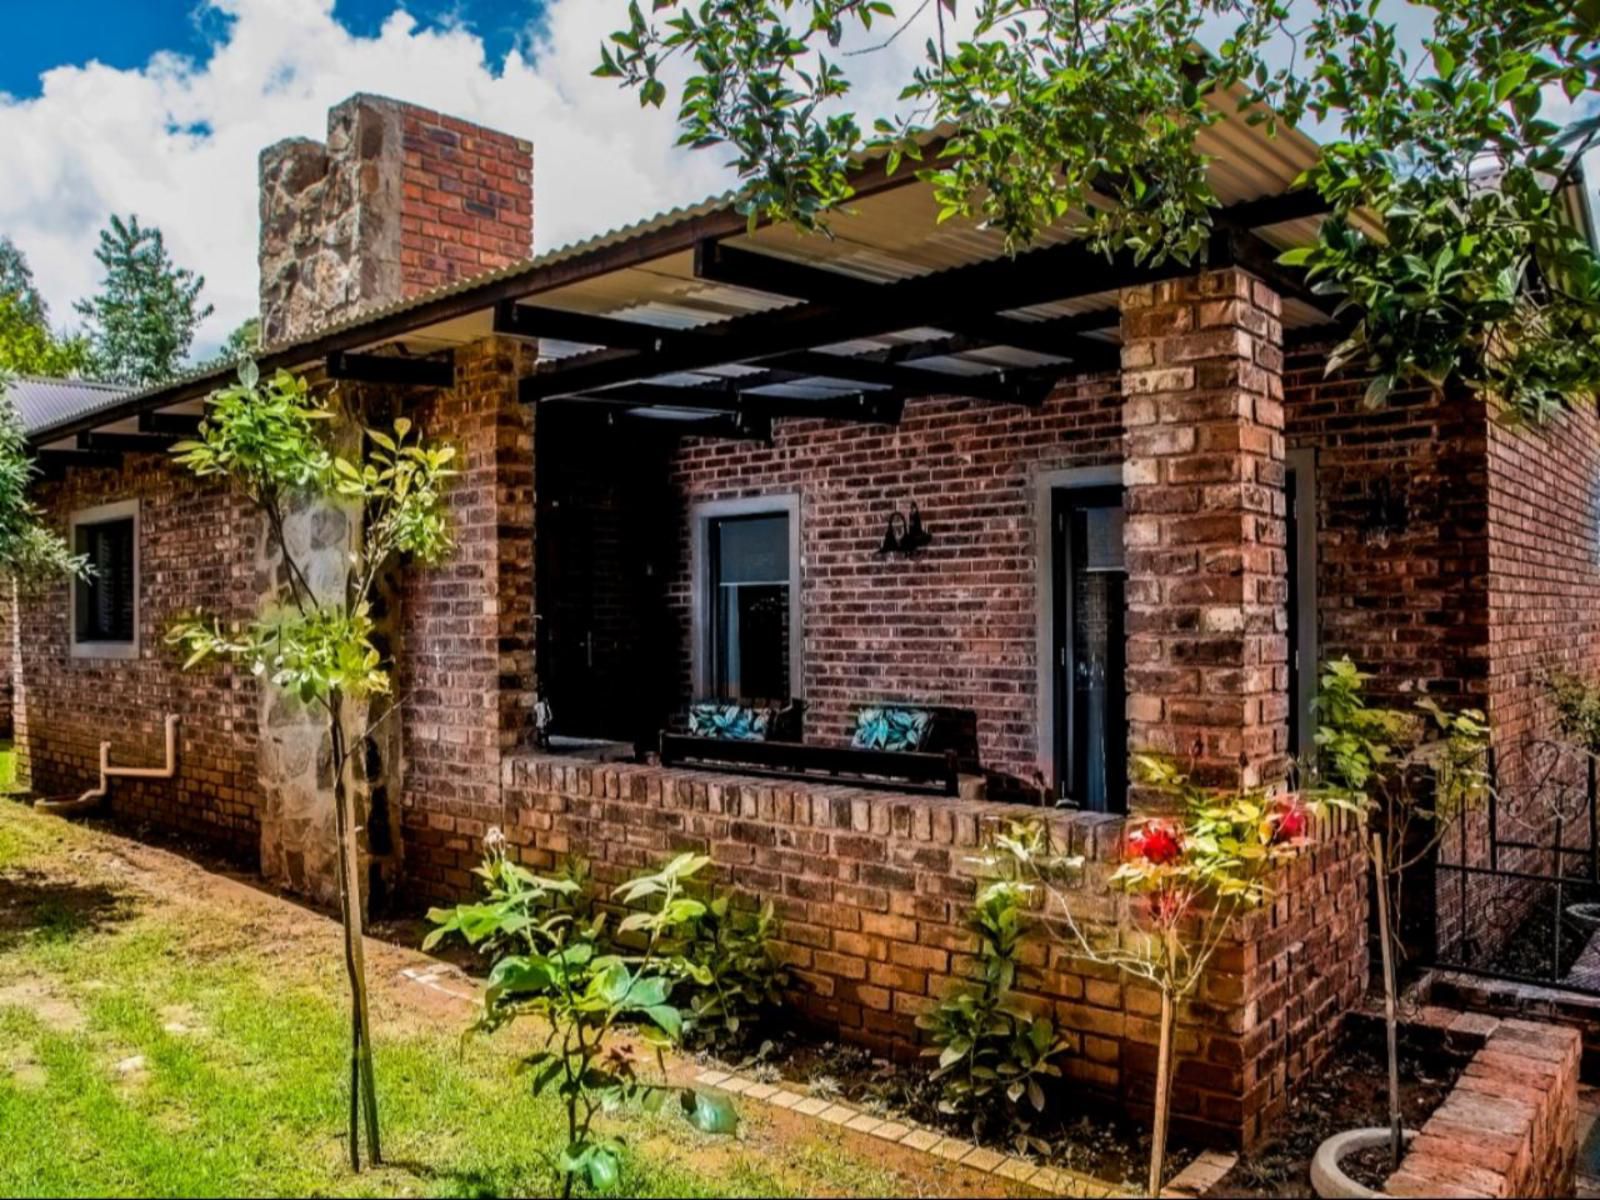 Tarry Stone Cottages Dullstroom Mpumalanga South Africa House, Building, Architecture, Brick Texture, Texture, Garden, Nature, Plant